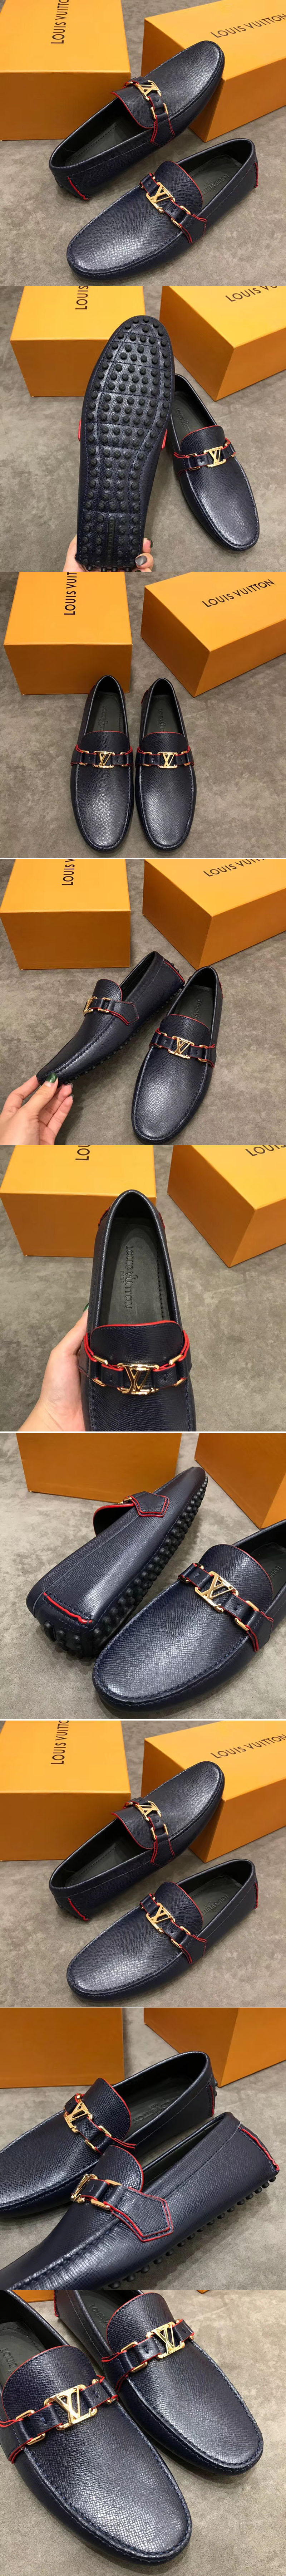 Replica Louis Vuitton LV Hockenheim Loafer And Shoes Blue Calf Leather Red Stitch